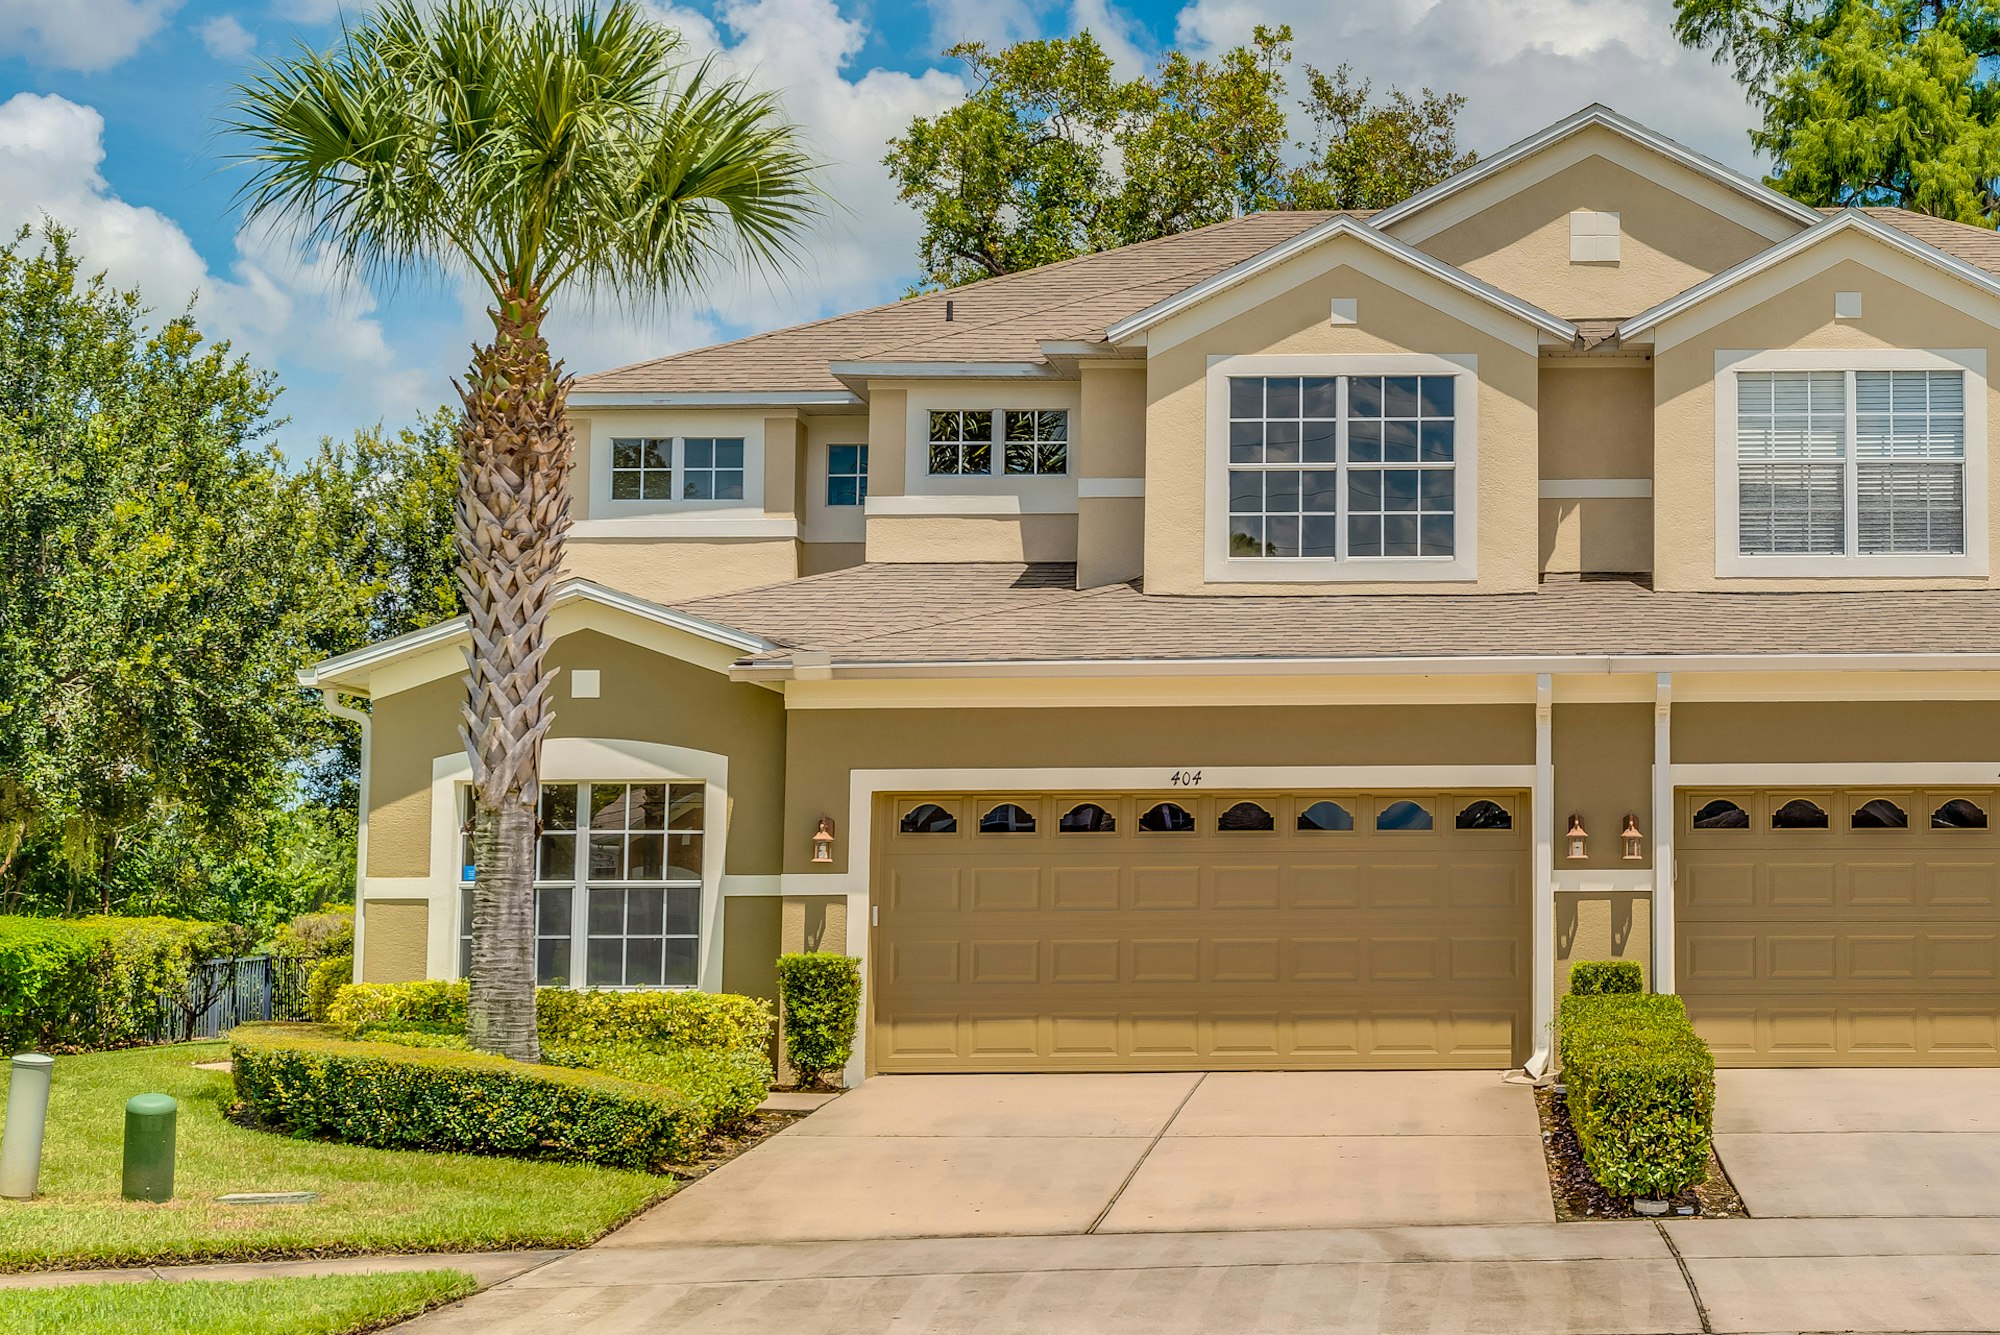 Photo 1 of 21 - 404 Harbor Winds Ct, Winter Springs, FL 32708